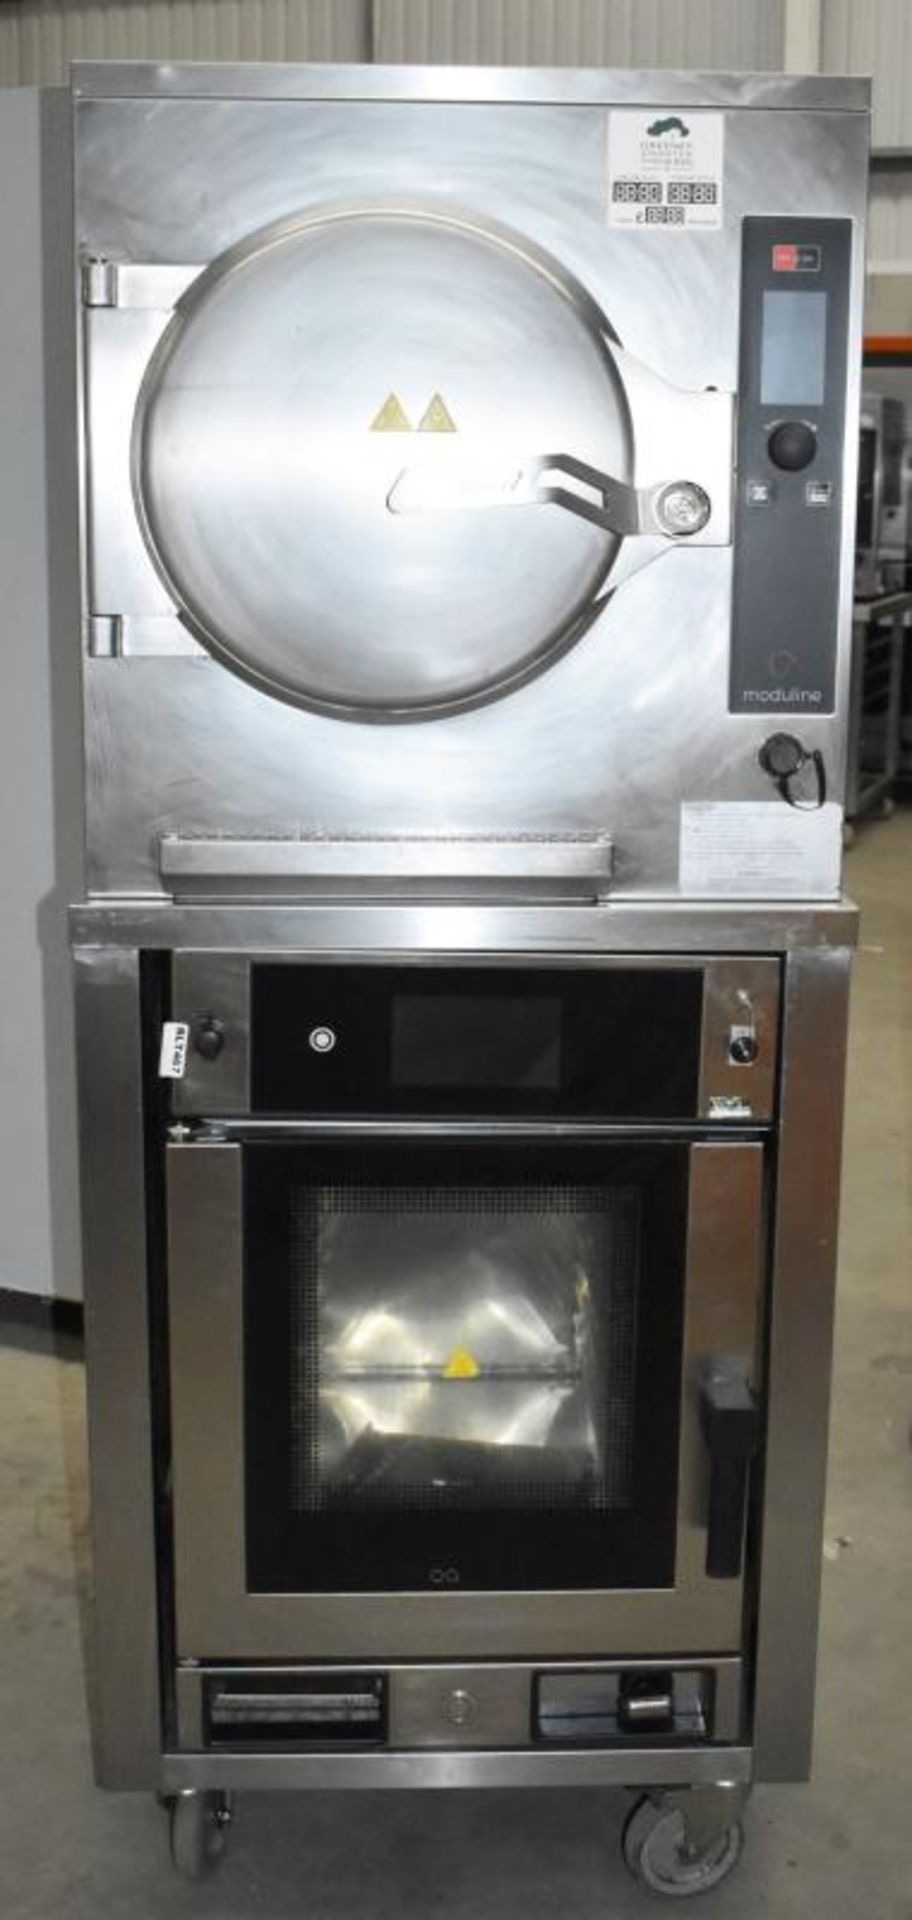 1 x Moduline Cook and Hold Convection Oven and Pressure Steamer Cooker - Features USB Connection, To - Image 3 of 16